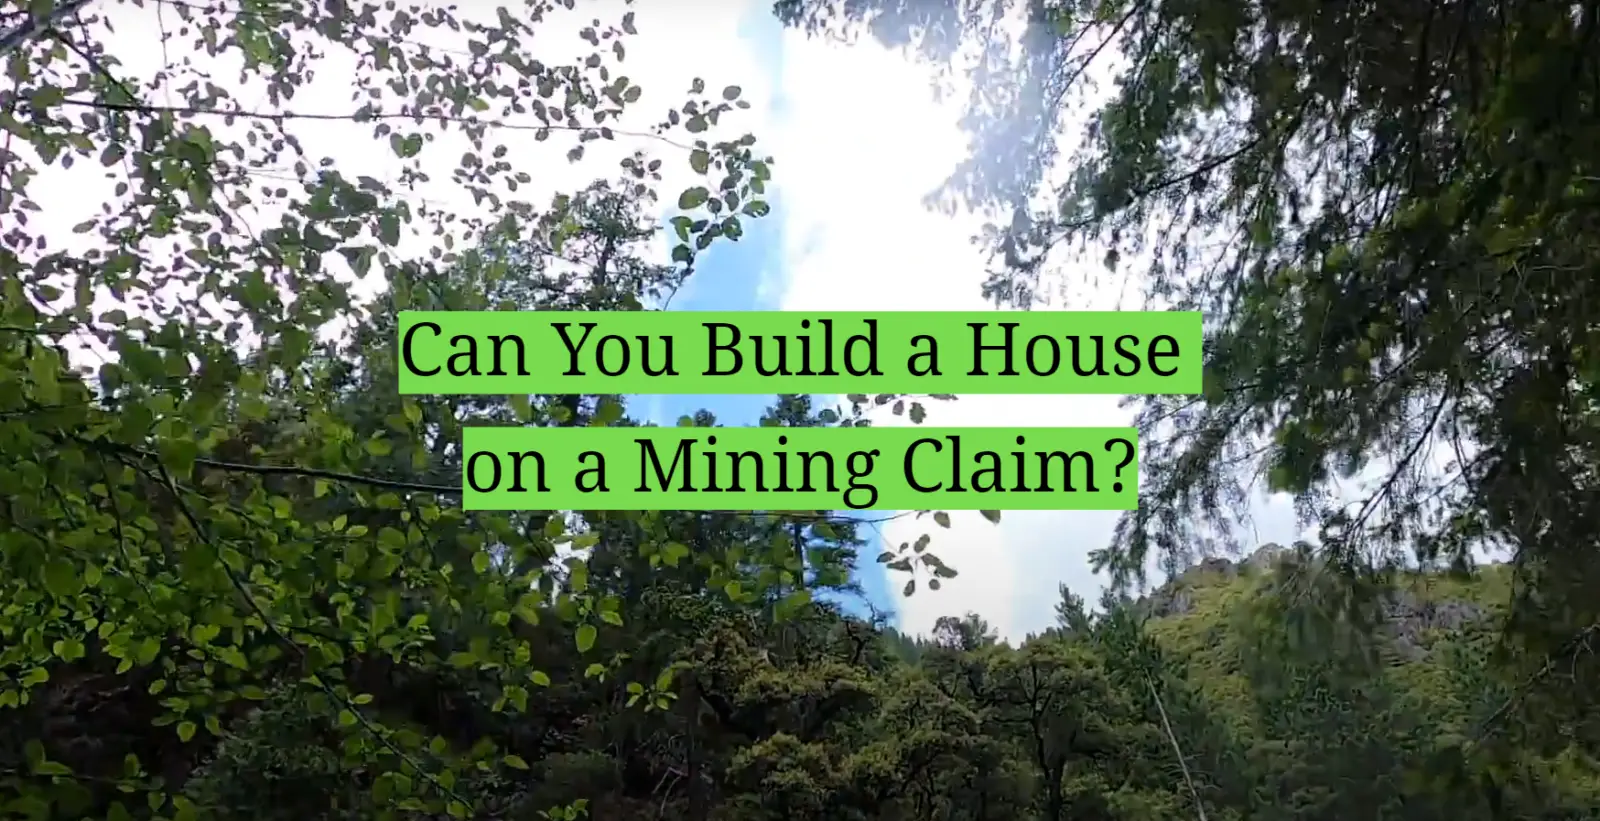 Can You Build a House on a Mining Claim?